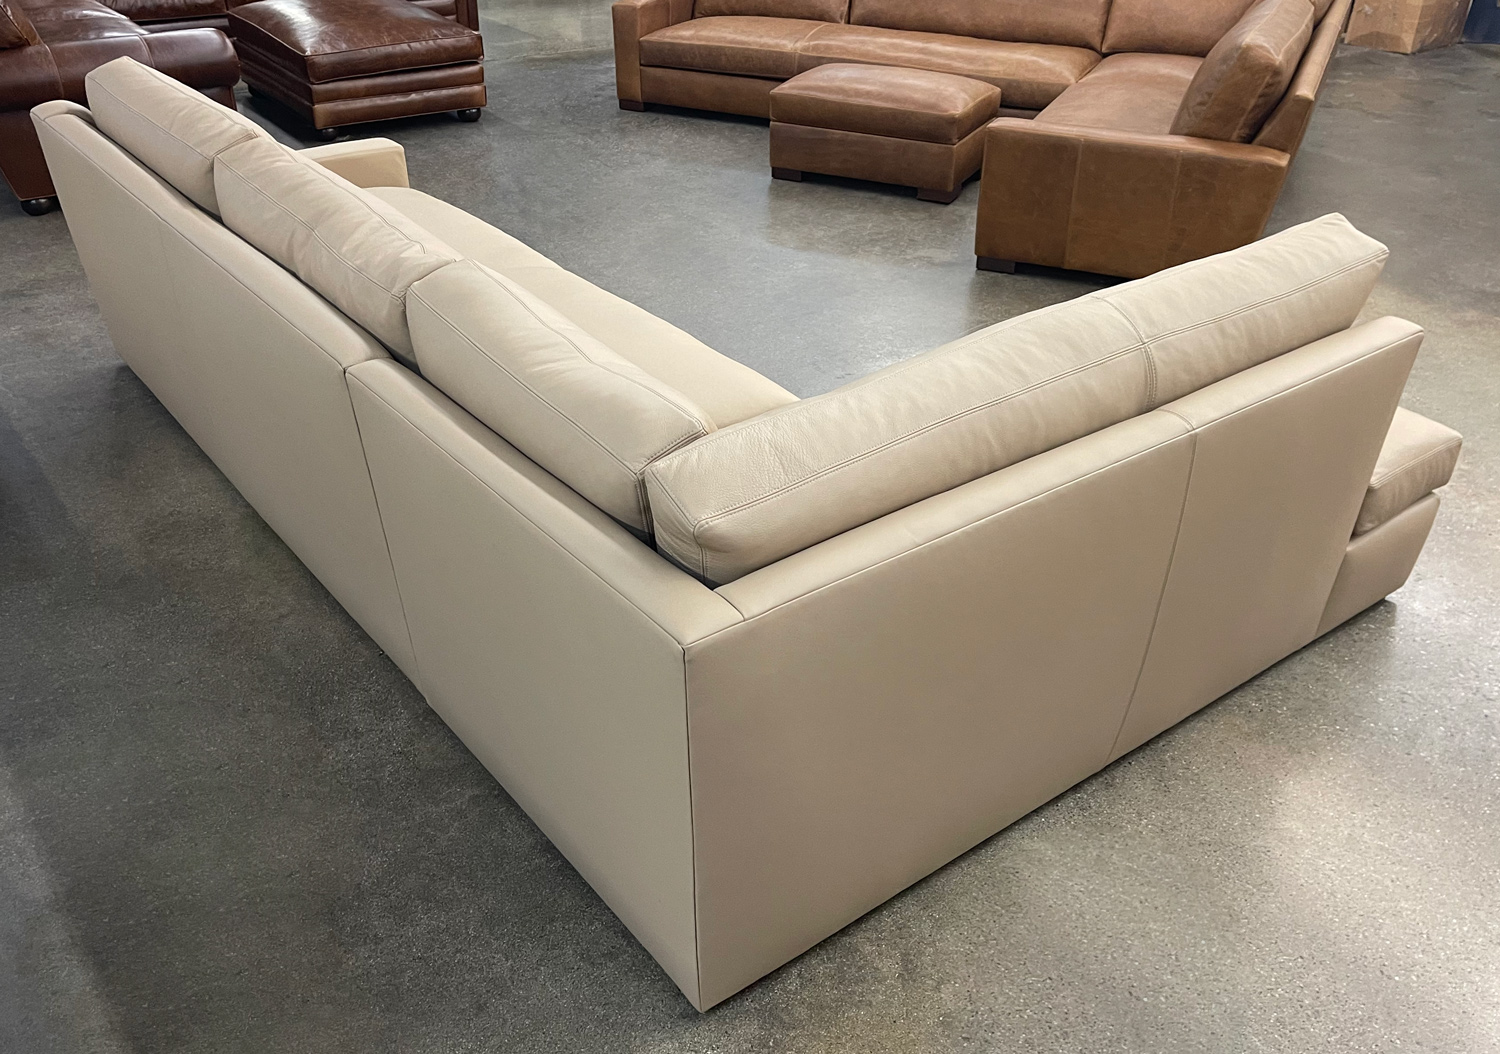 LAF Julien Track Arm Bumper Chaise Sectional Sofa in Jet Buckskin Leather - LAF rear angle view